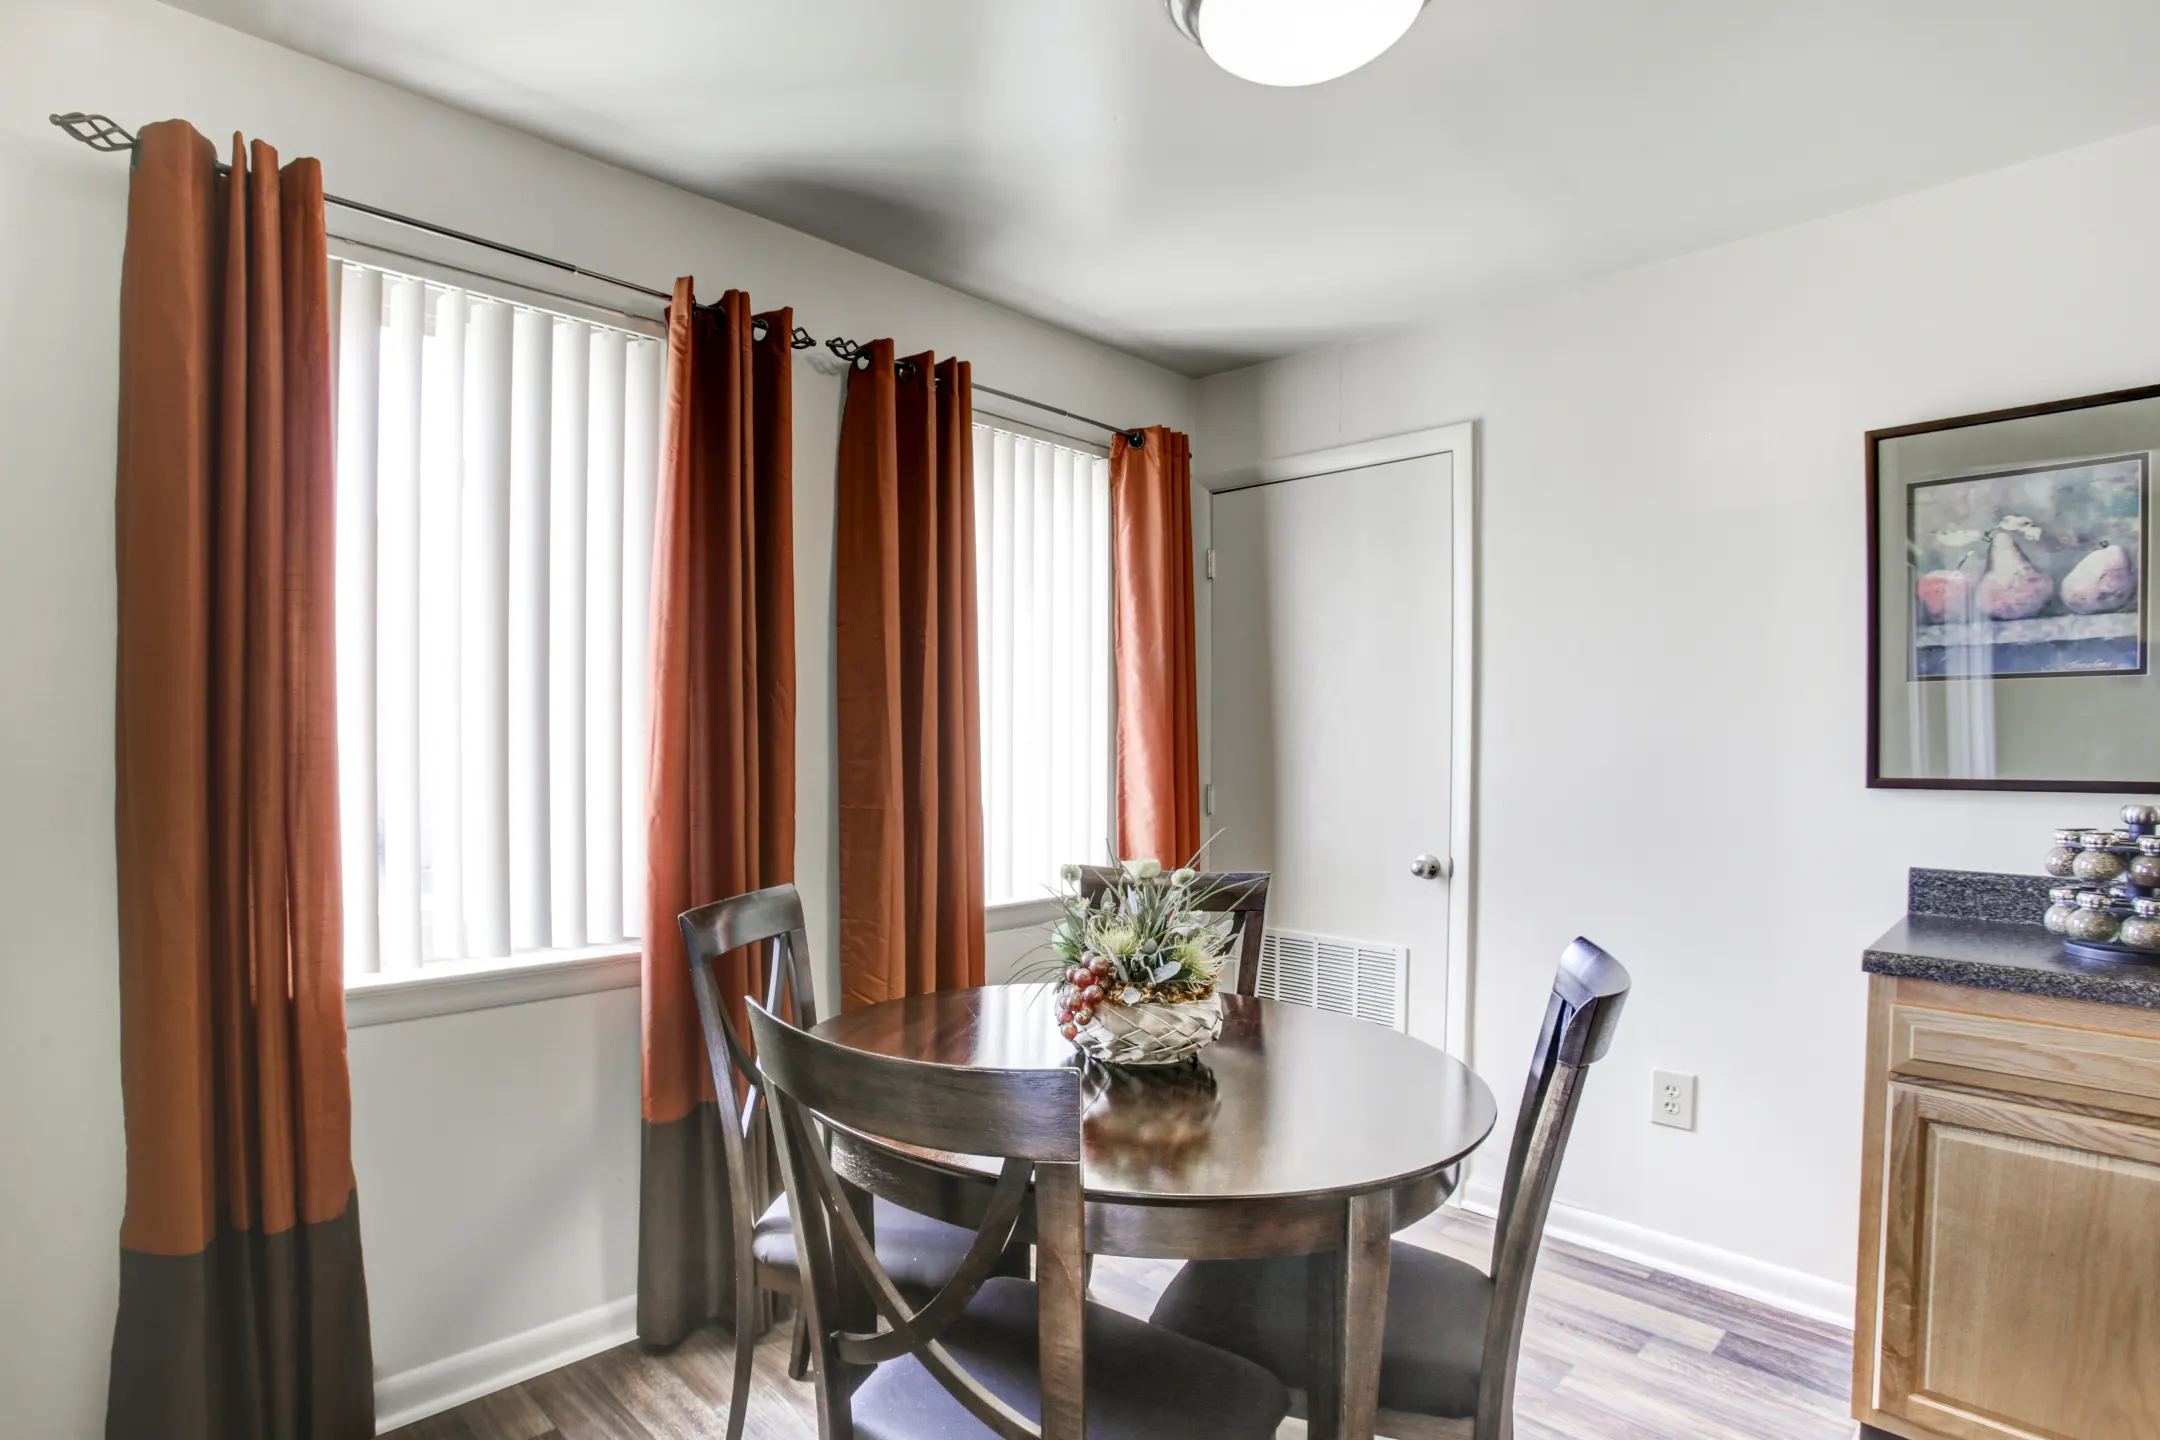 Dining Room - The Apartments at Elmwood Terrace/Hunters Glen - Frederick, MD